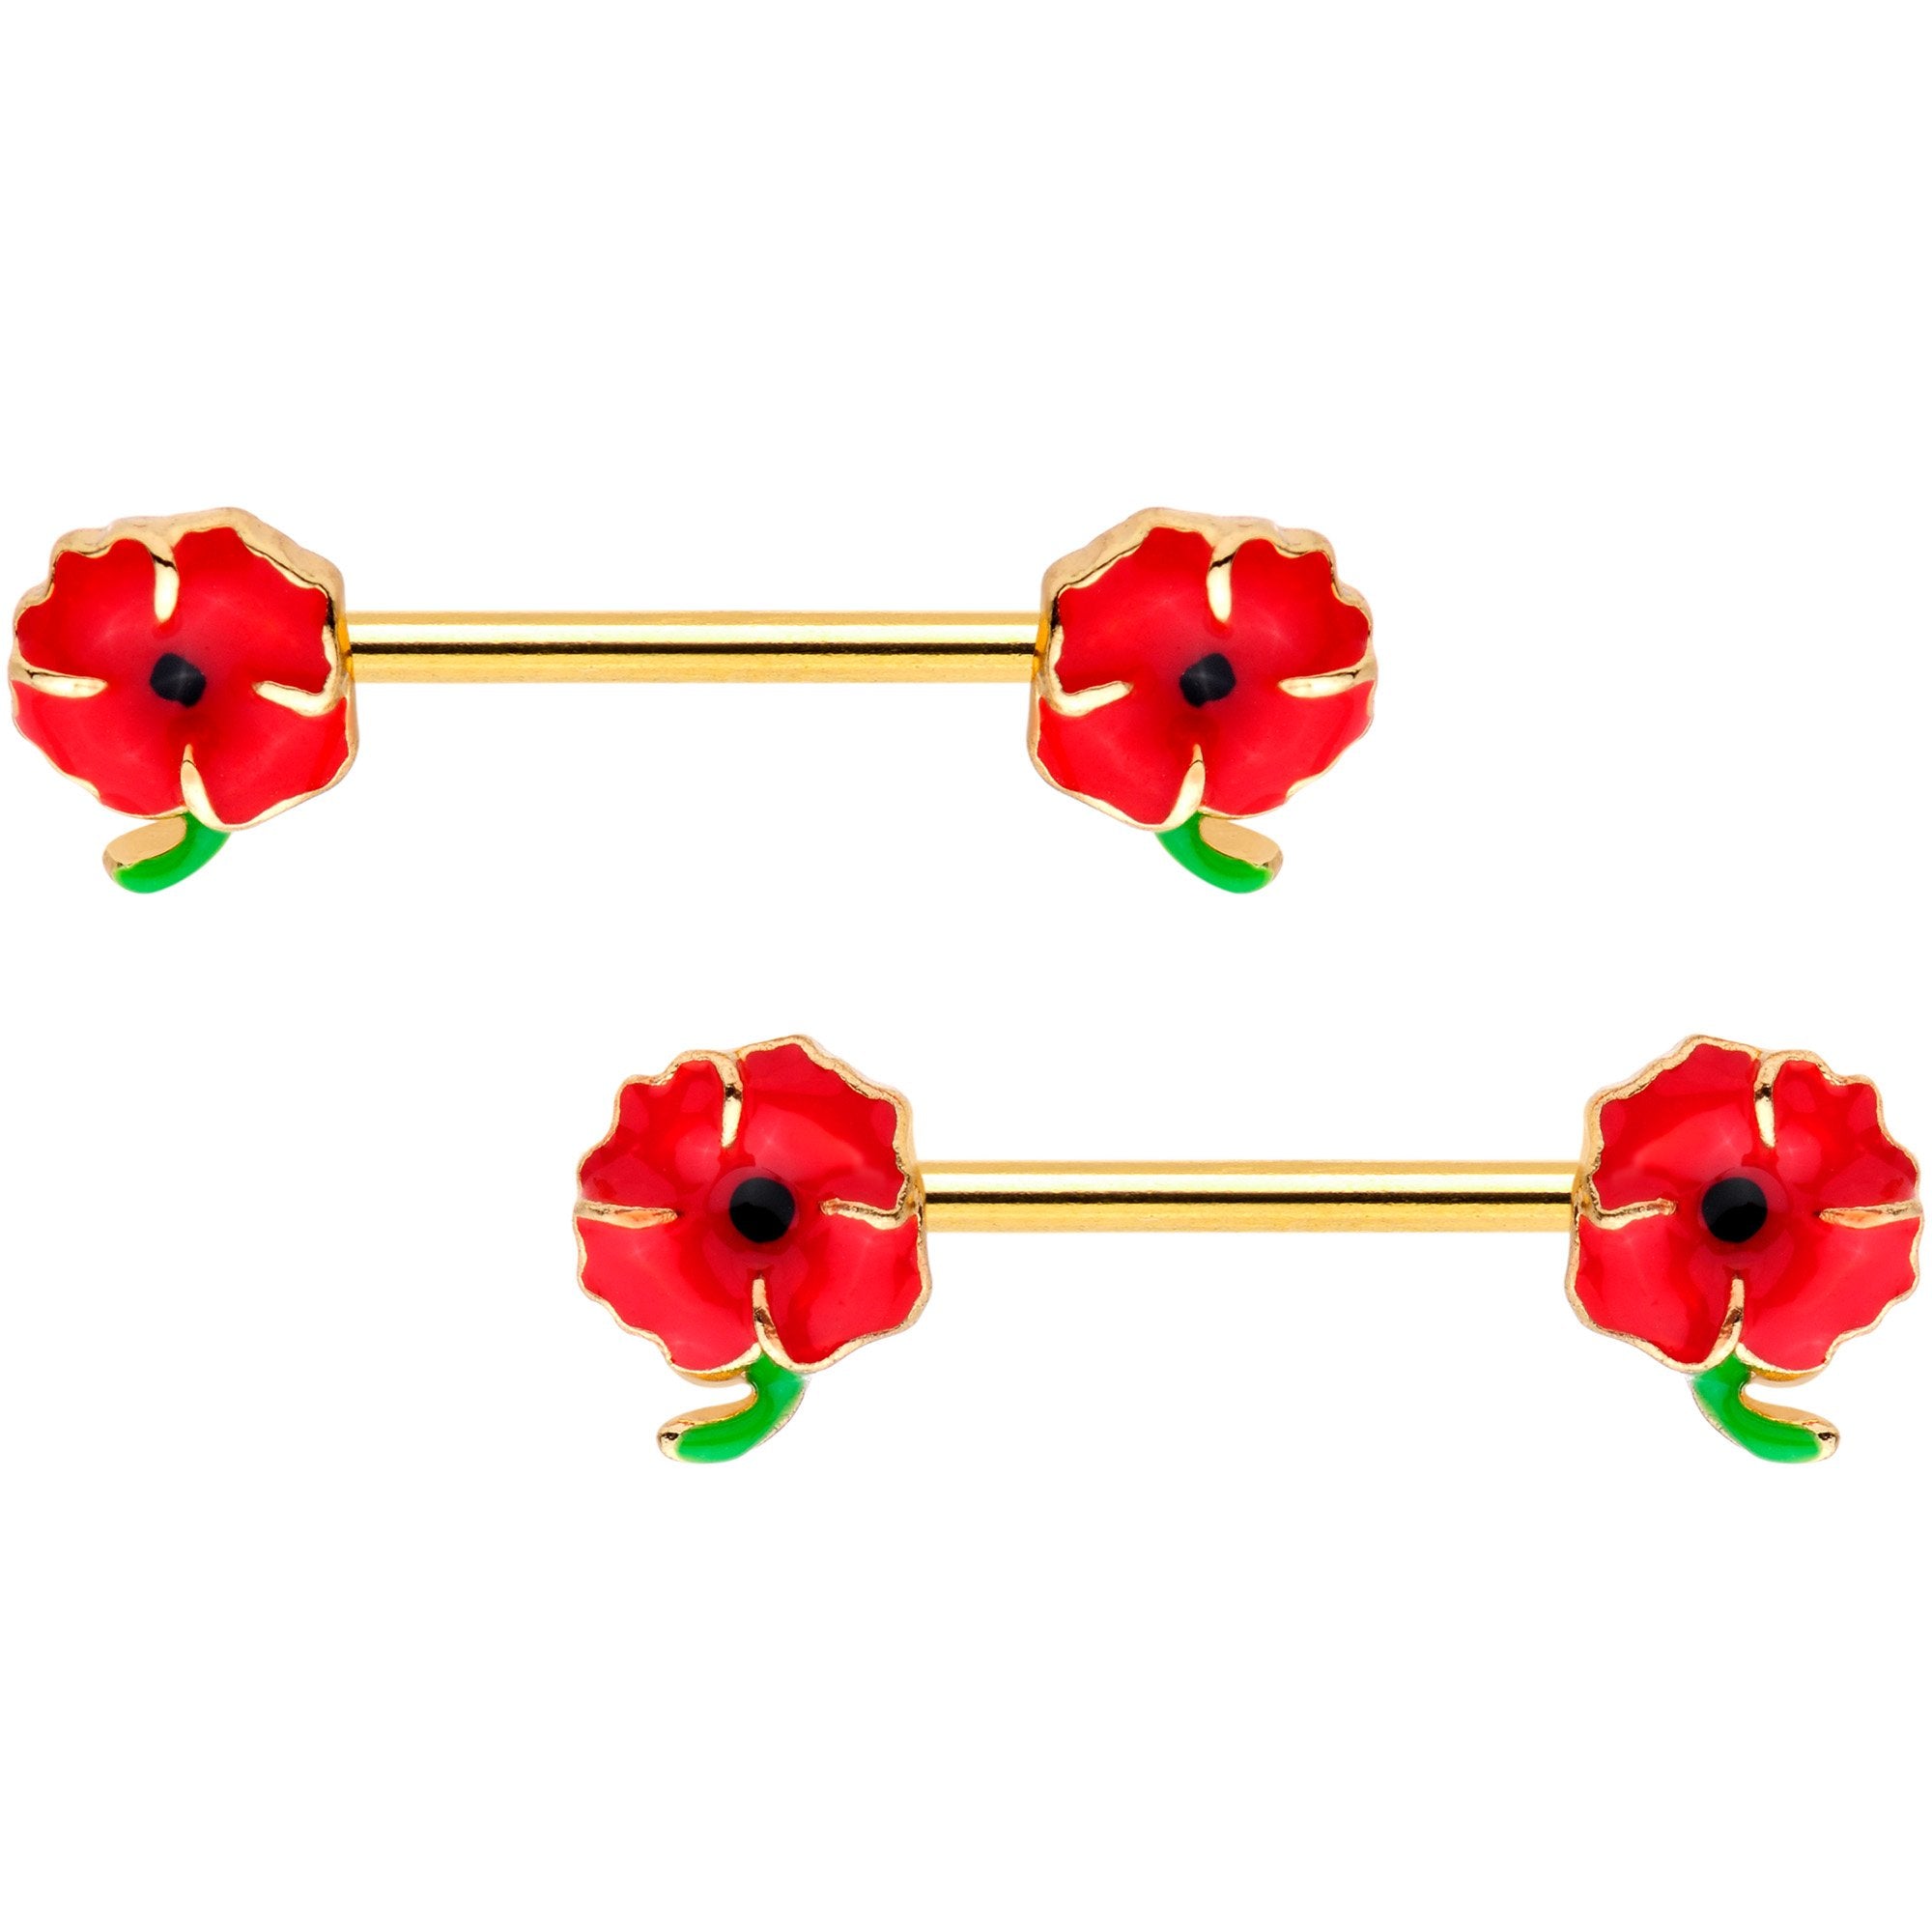 14 Gauge 9/16 Gold Tone Field of Poppies Barbell Nipple Ring Set